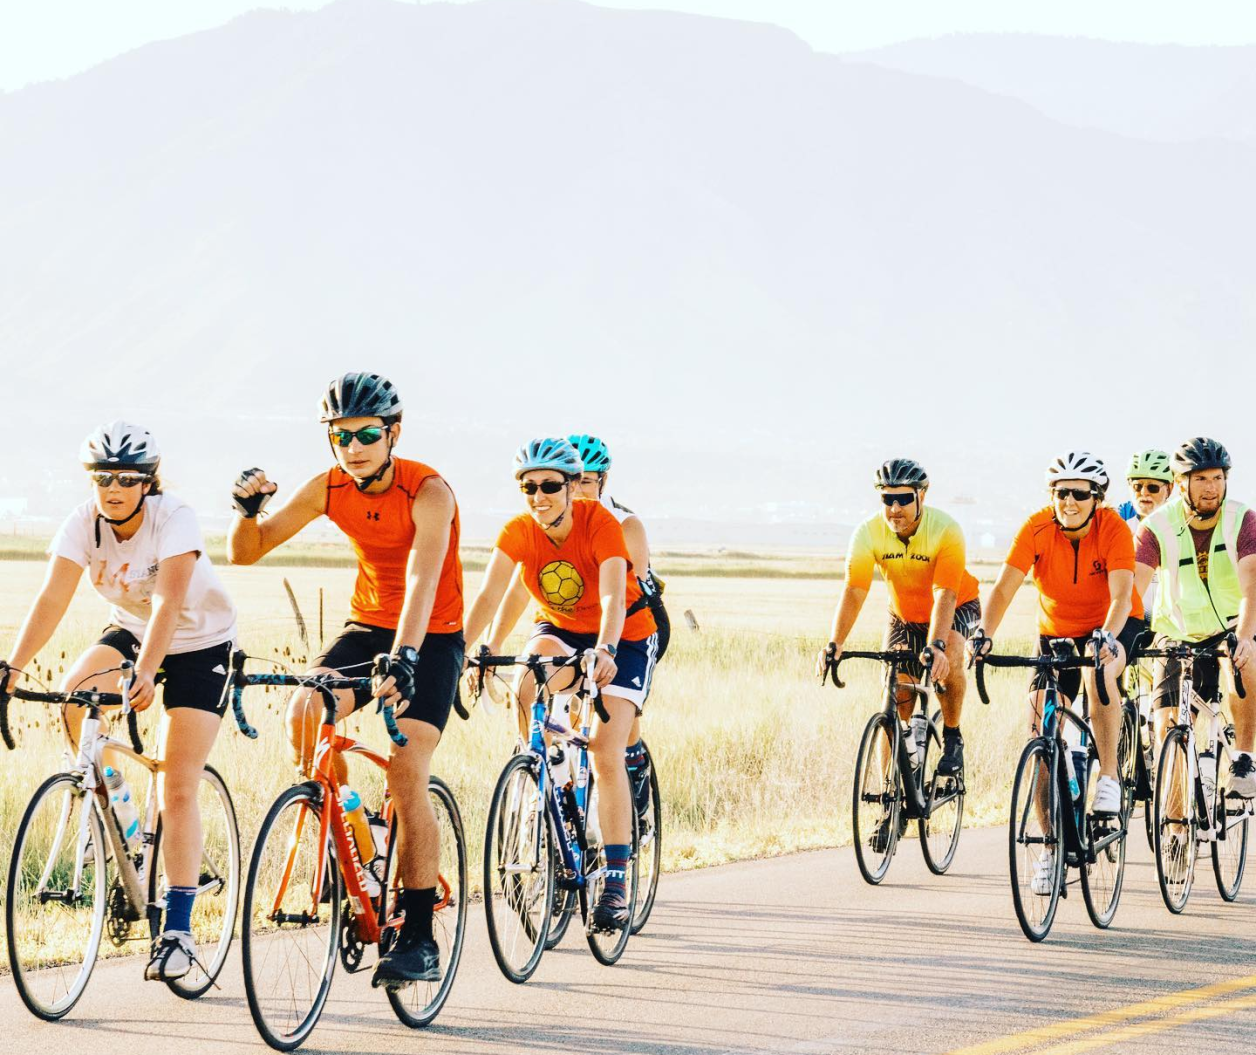 The Cache Gran Fondo has been a way to generate donations and raise awareness for charities and local causes.